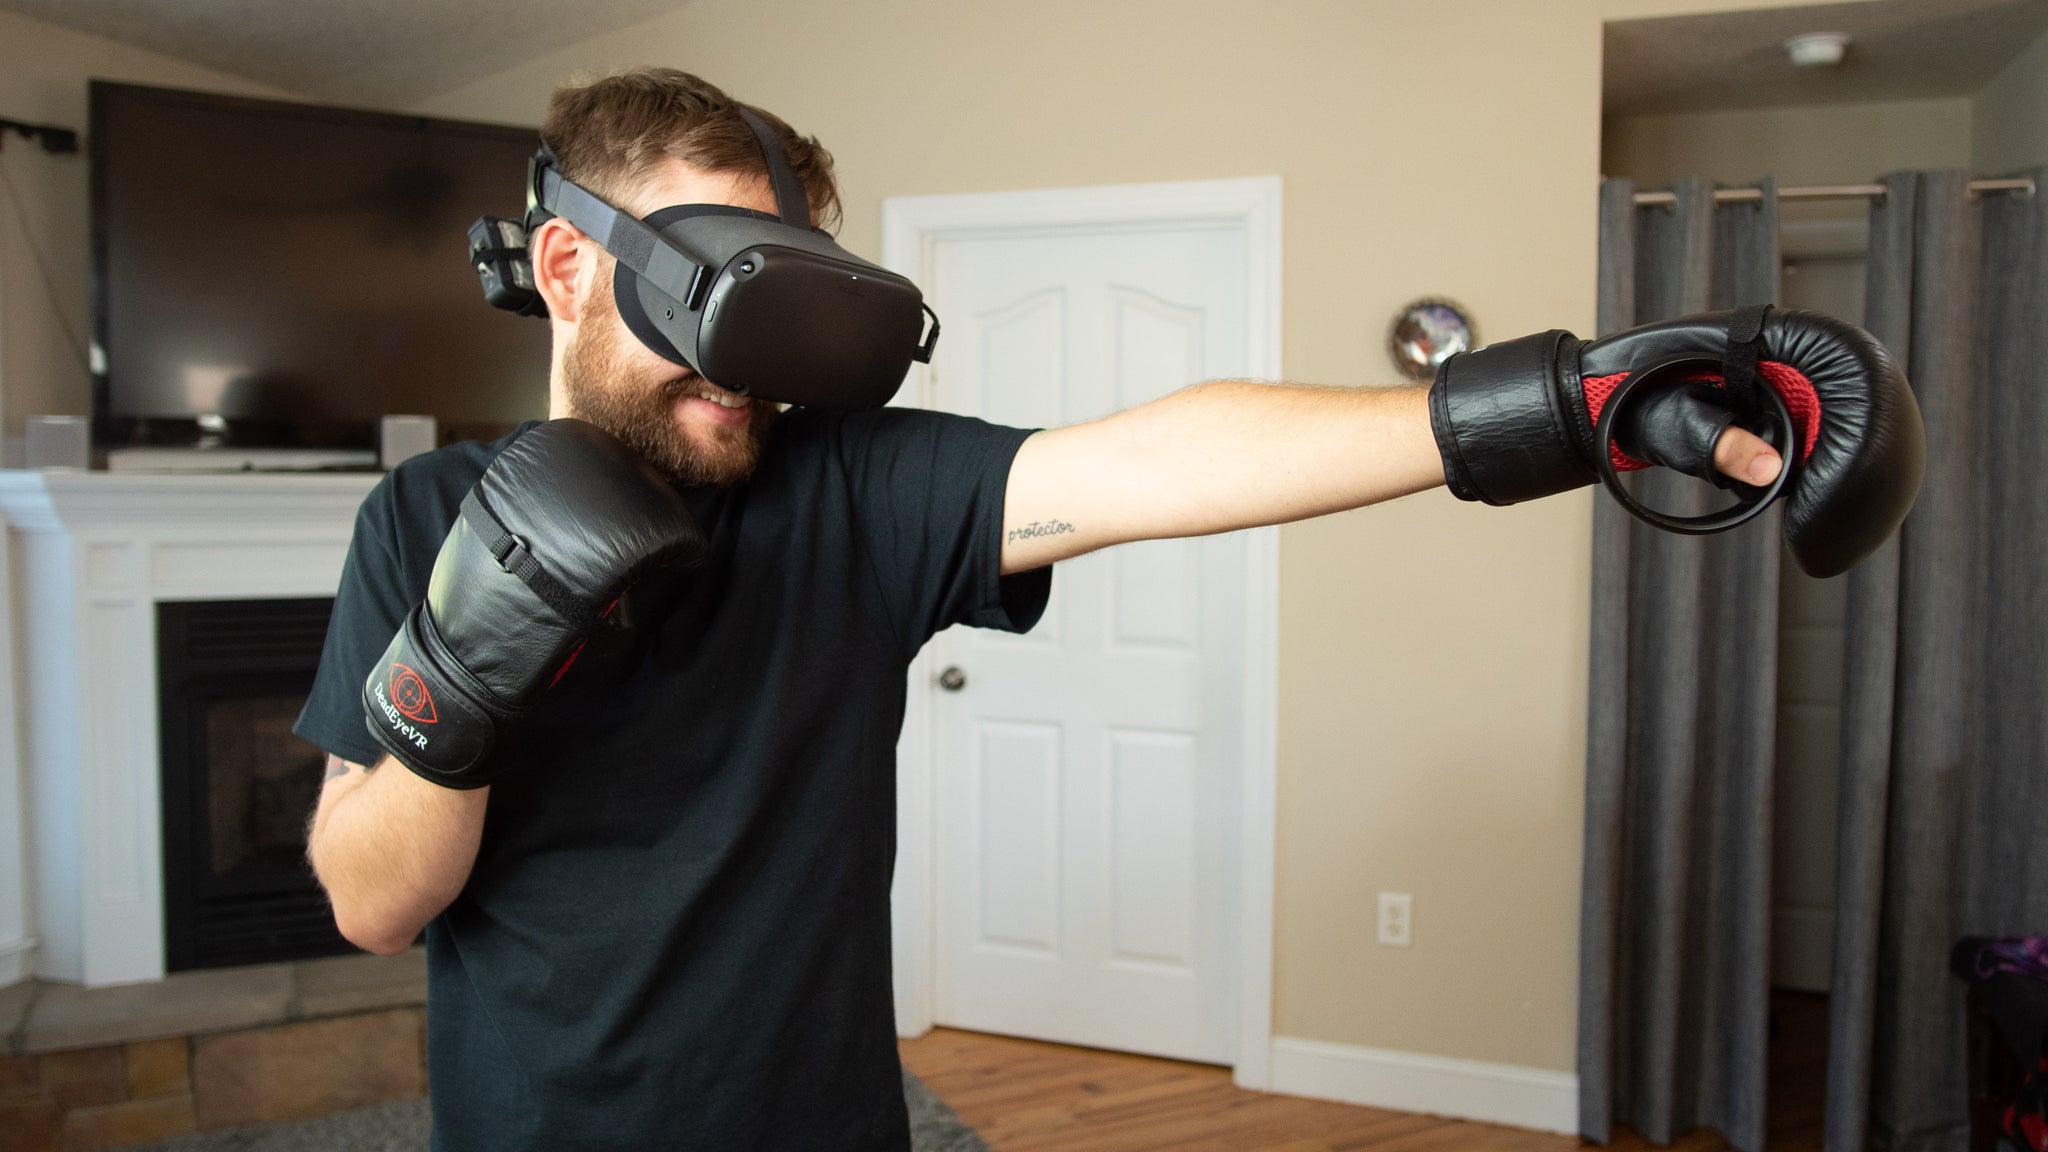 Ultimate Boxing Gloves - Boxing Mitts for Meta Quest, Quest 2, Oculus Rift S, and Valve Index